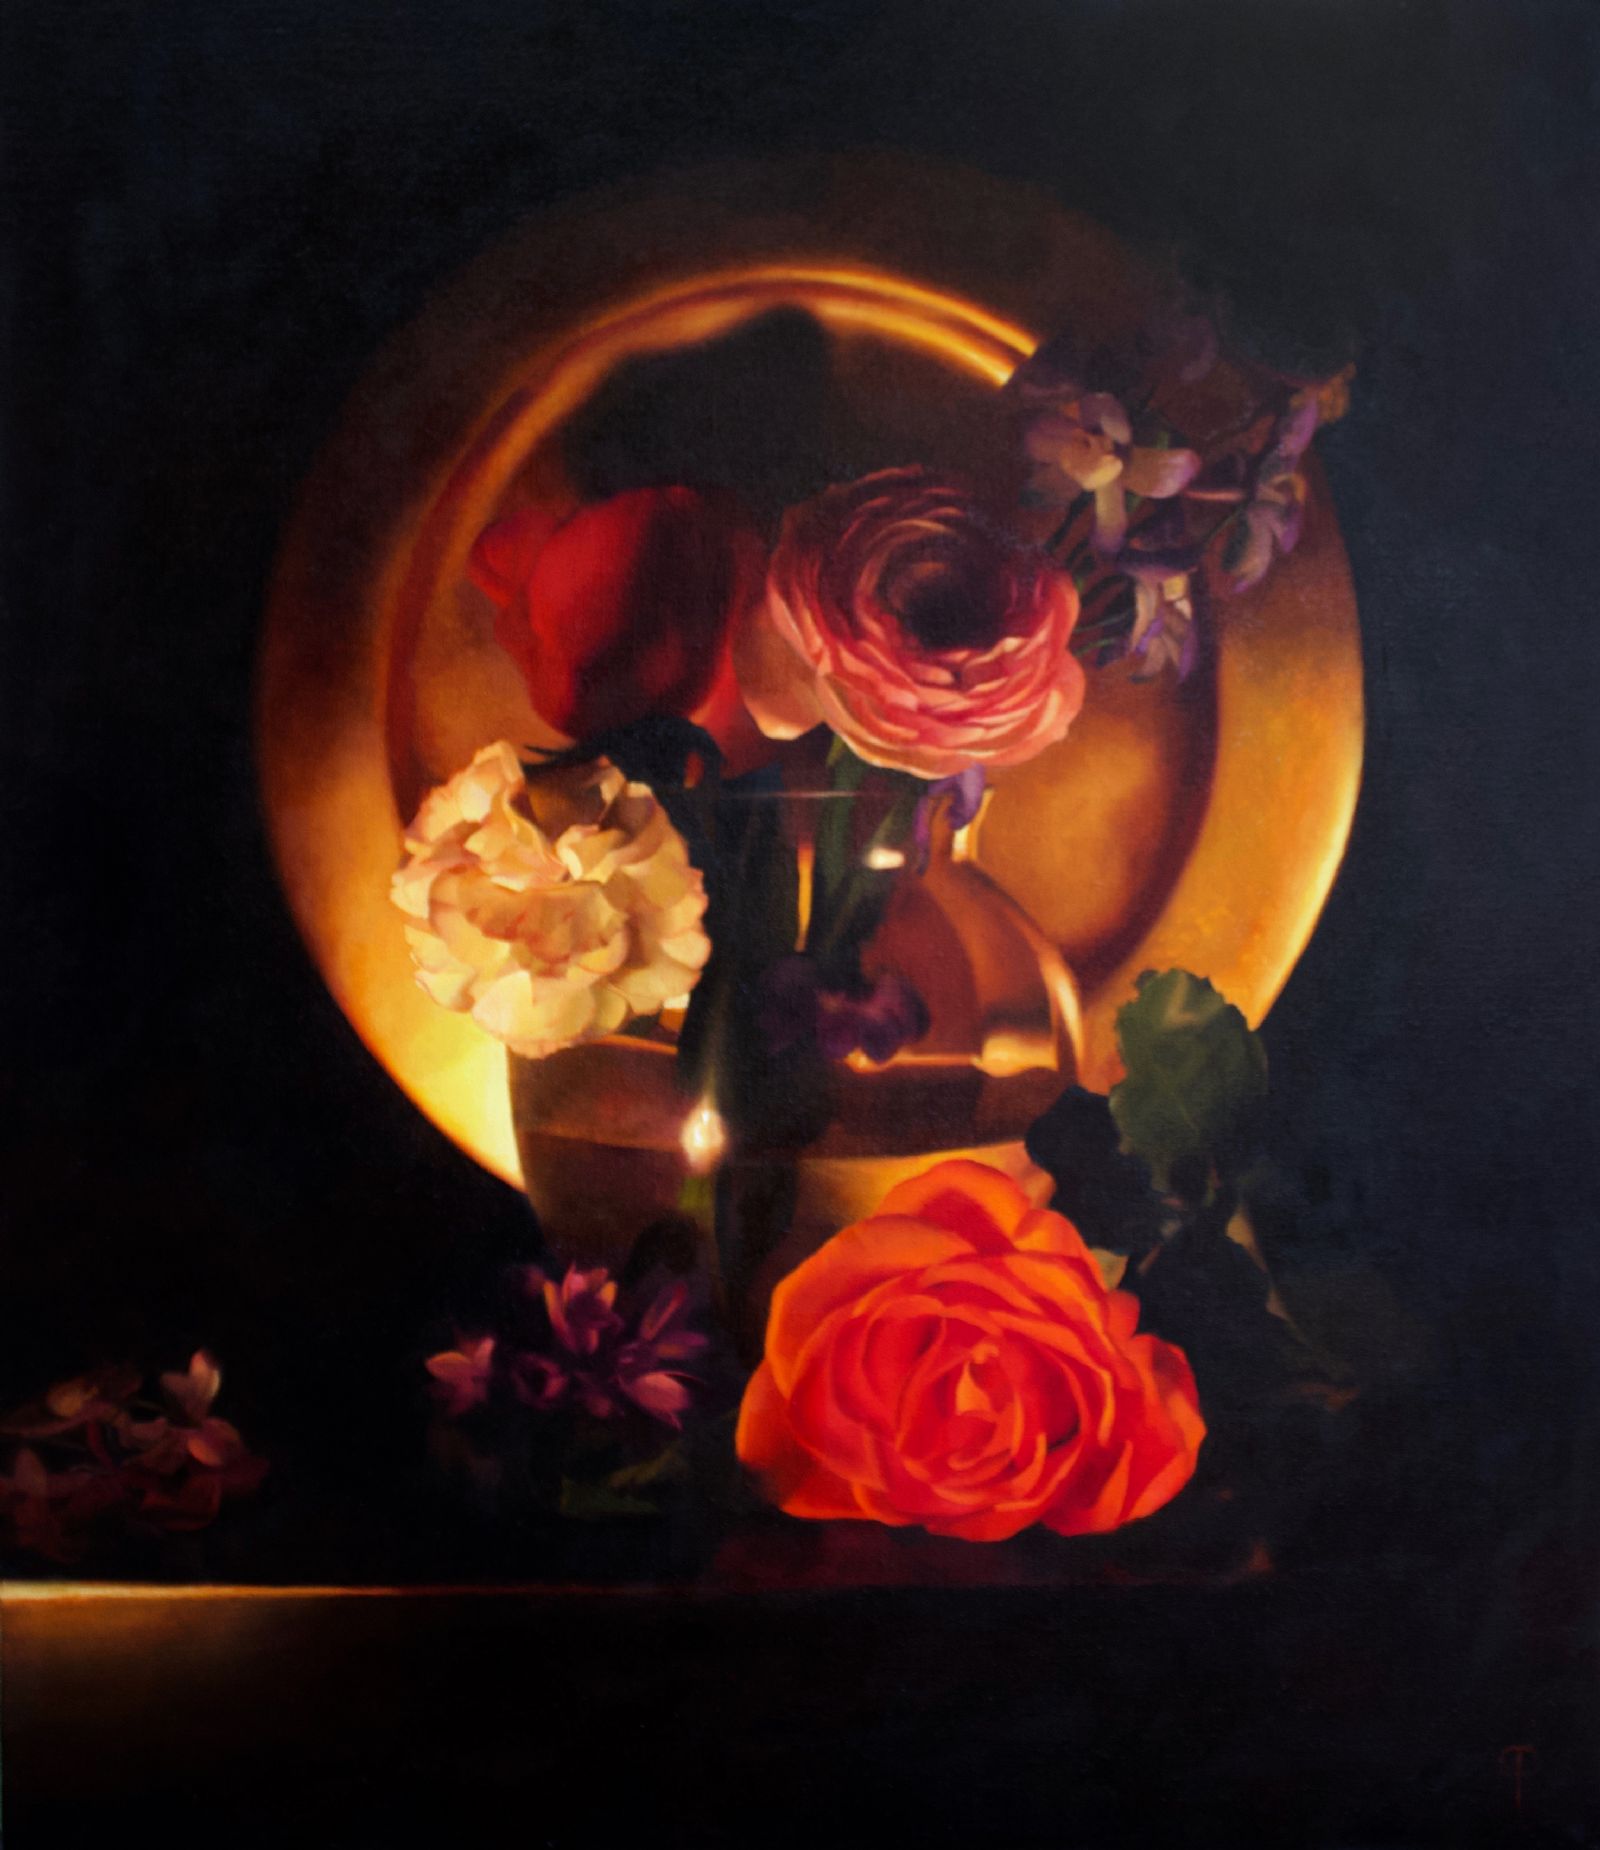 Flowers by Candlelight VII by Chris Polunin